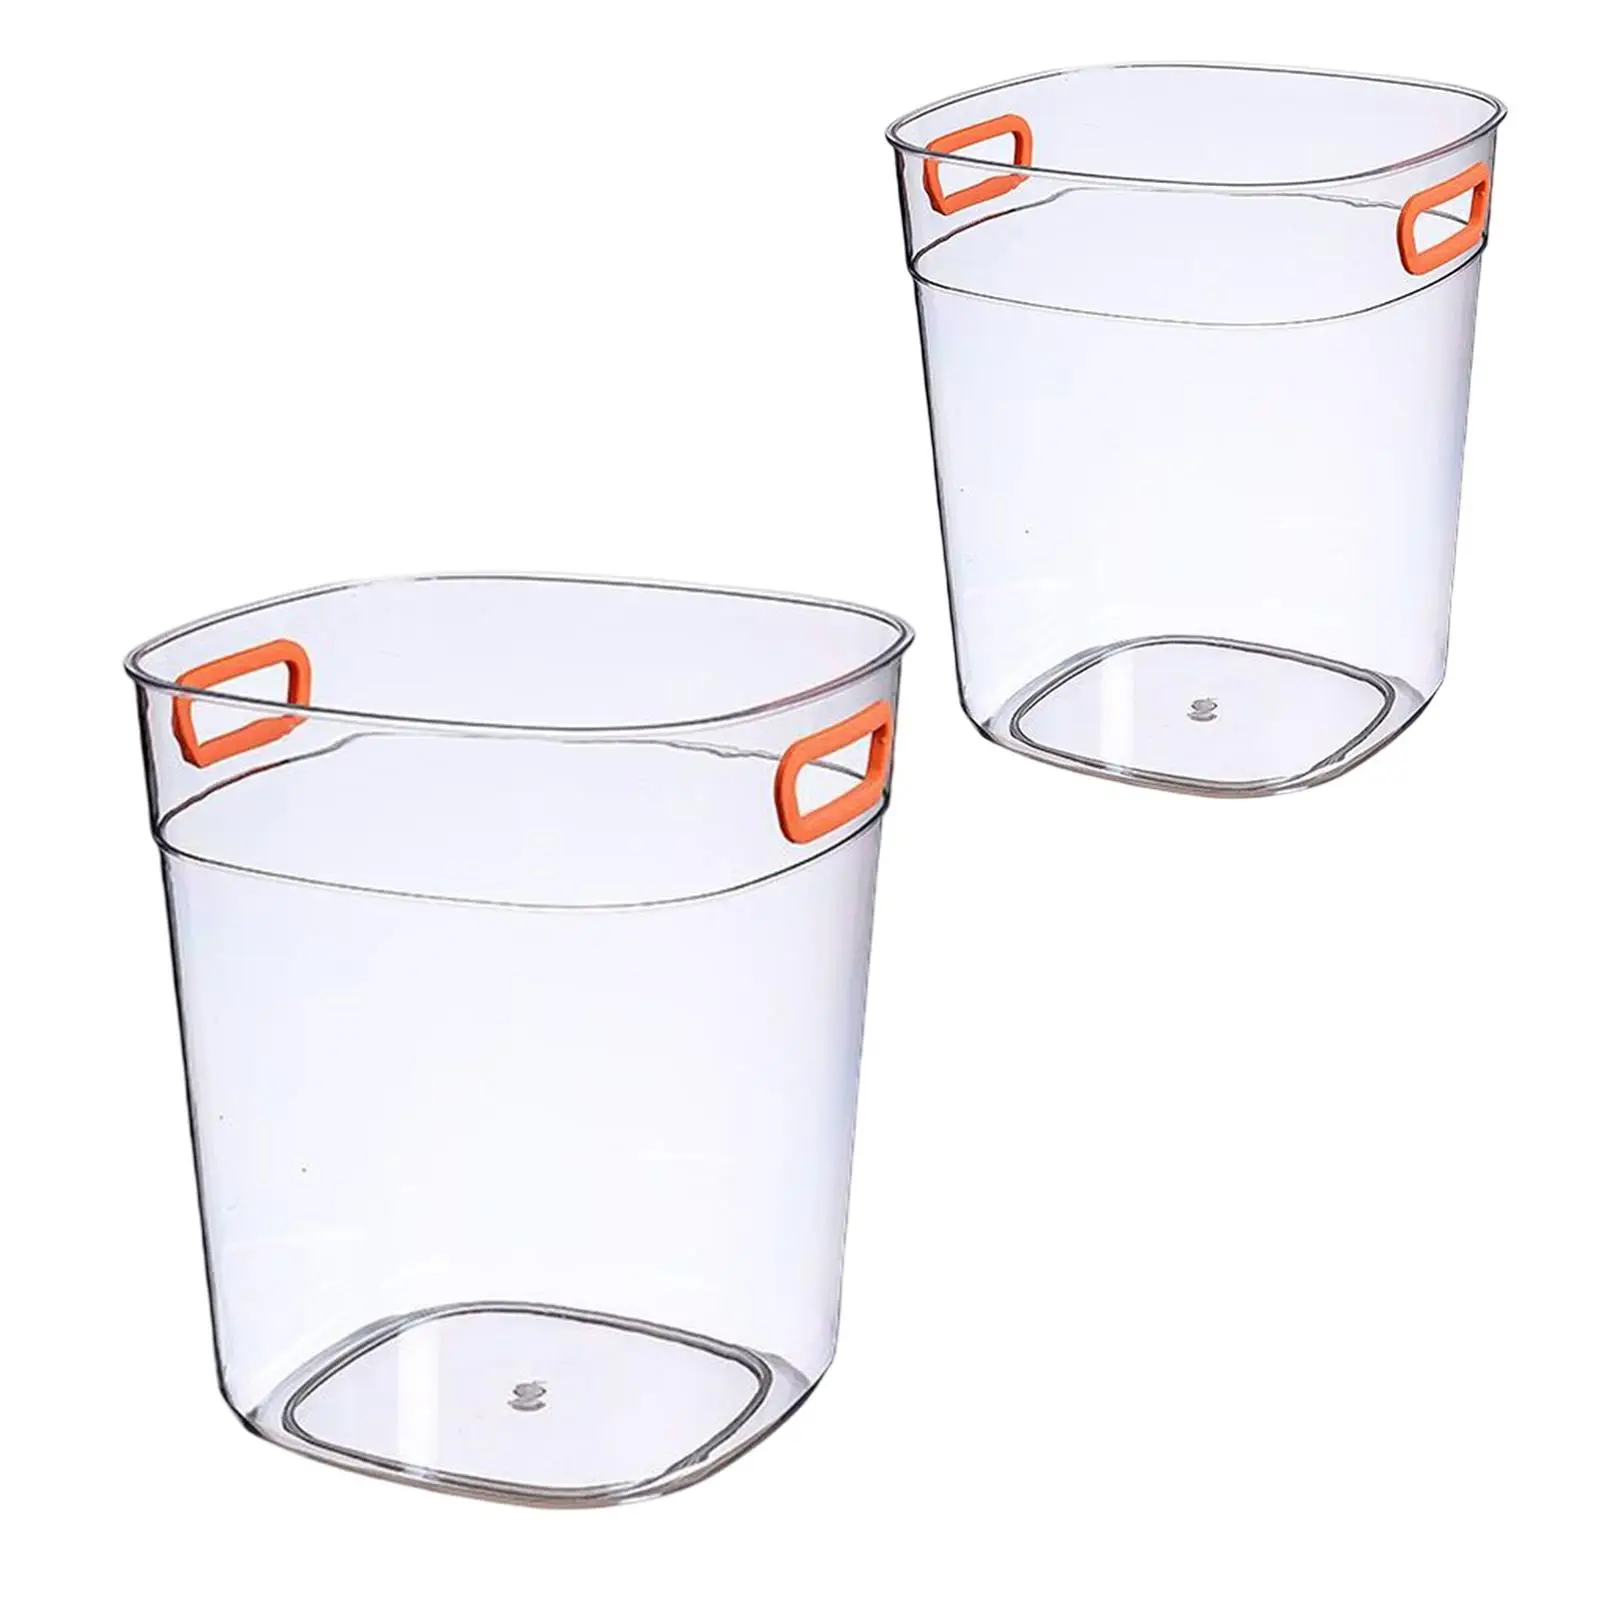 Ice Buckets for Parties, Champagne Bucket, Clear Acrylic Beer Bucket, Ice Bucket for Beer, Wine and Champagne